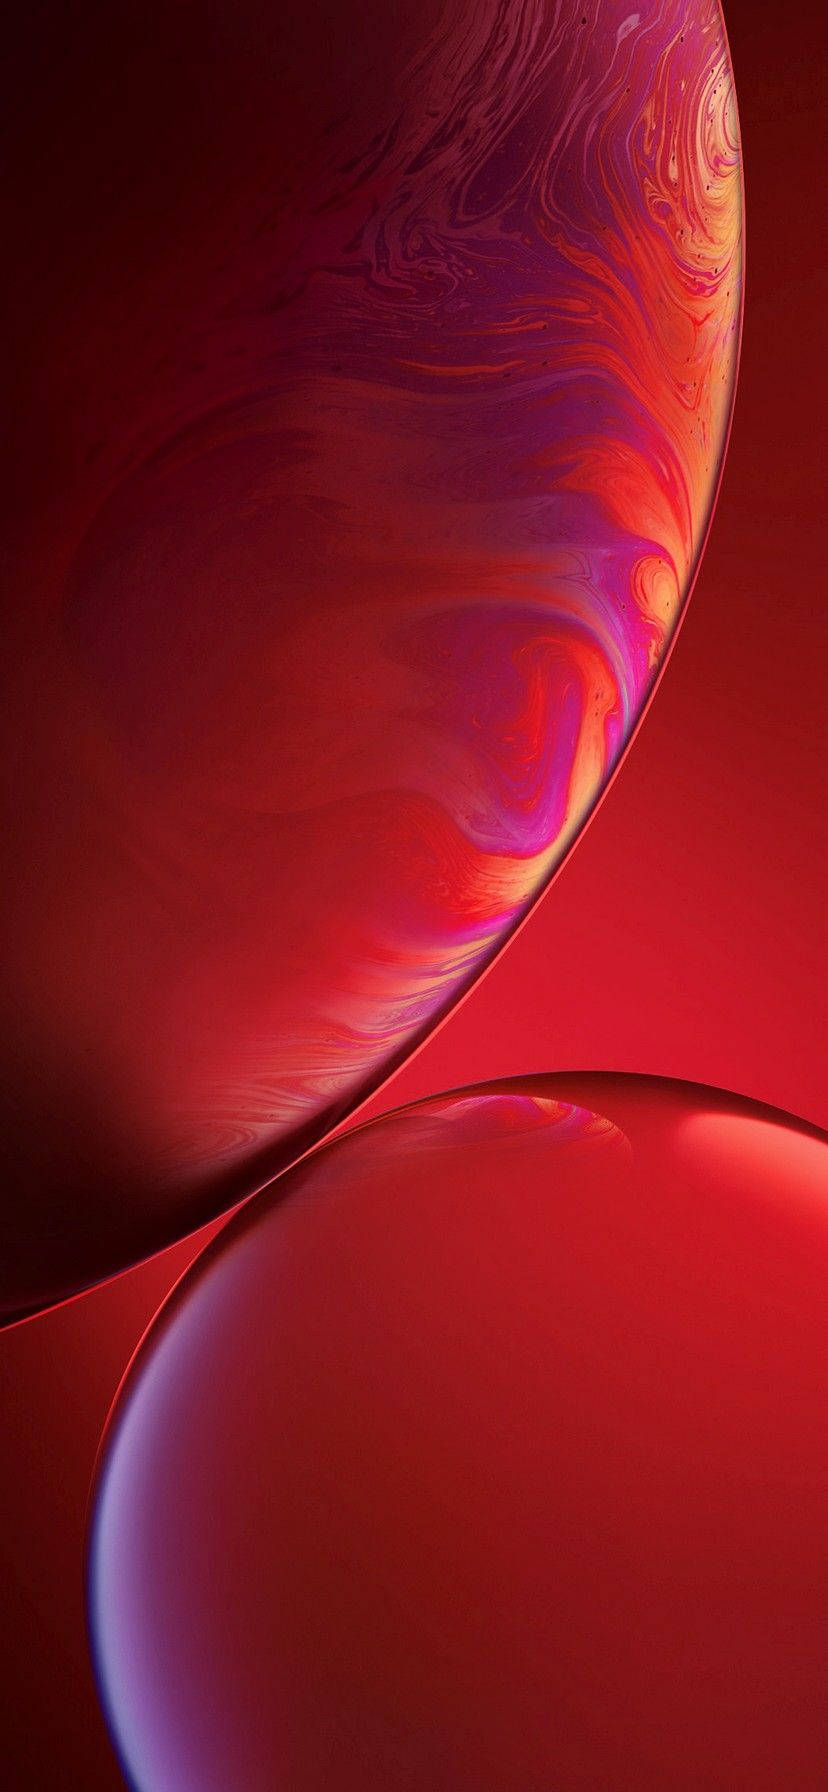 Iphone Xr Red Swirled Bubbles Background